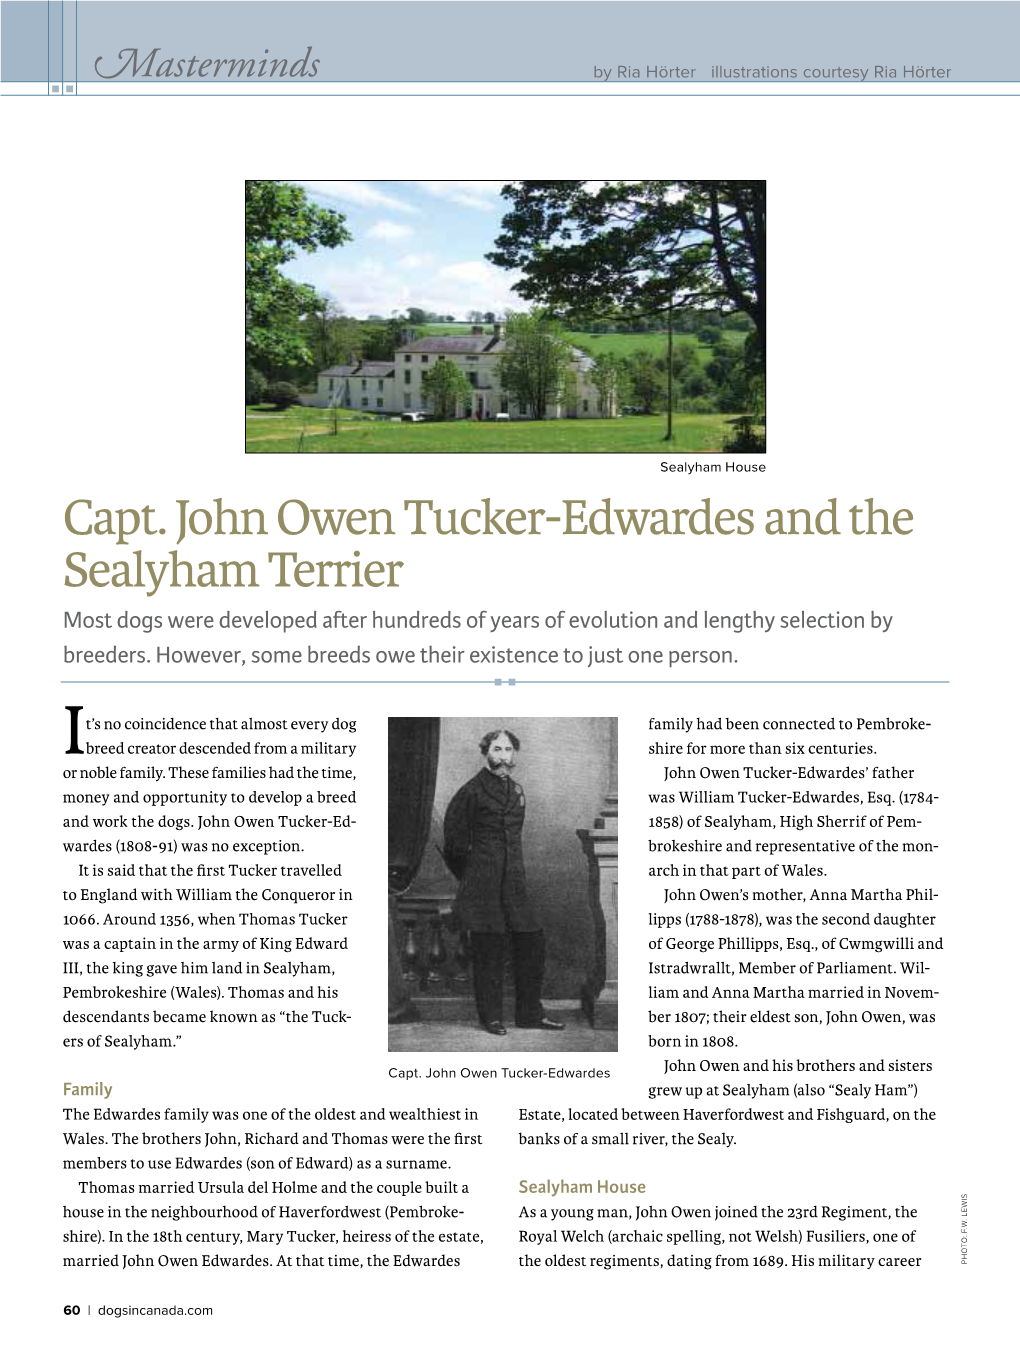 Capt. John Owen Tucker-Edwardes and the Sealyham Terrier Most Dogs Were Developed After Hundreds of Years of Evolution and Lengthy Selection by Breeders